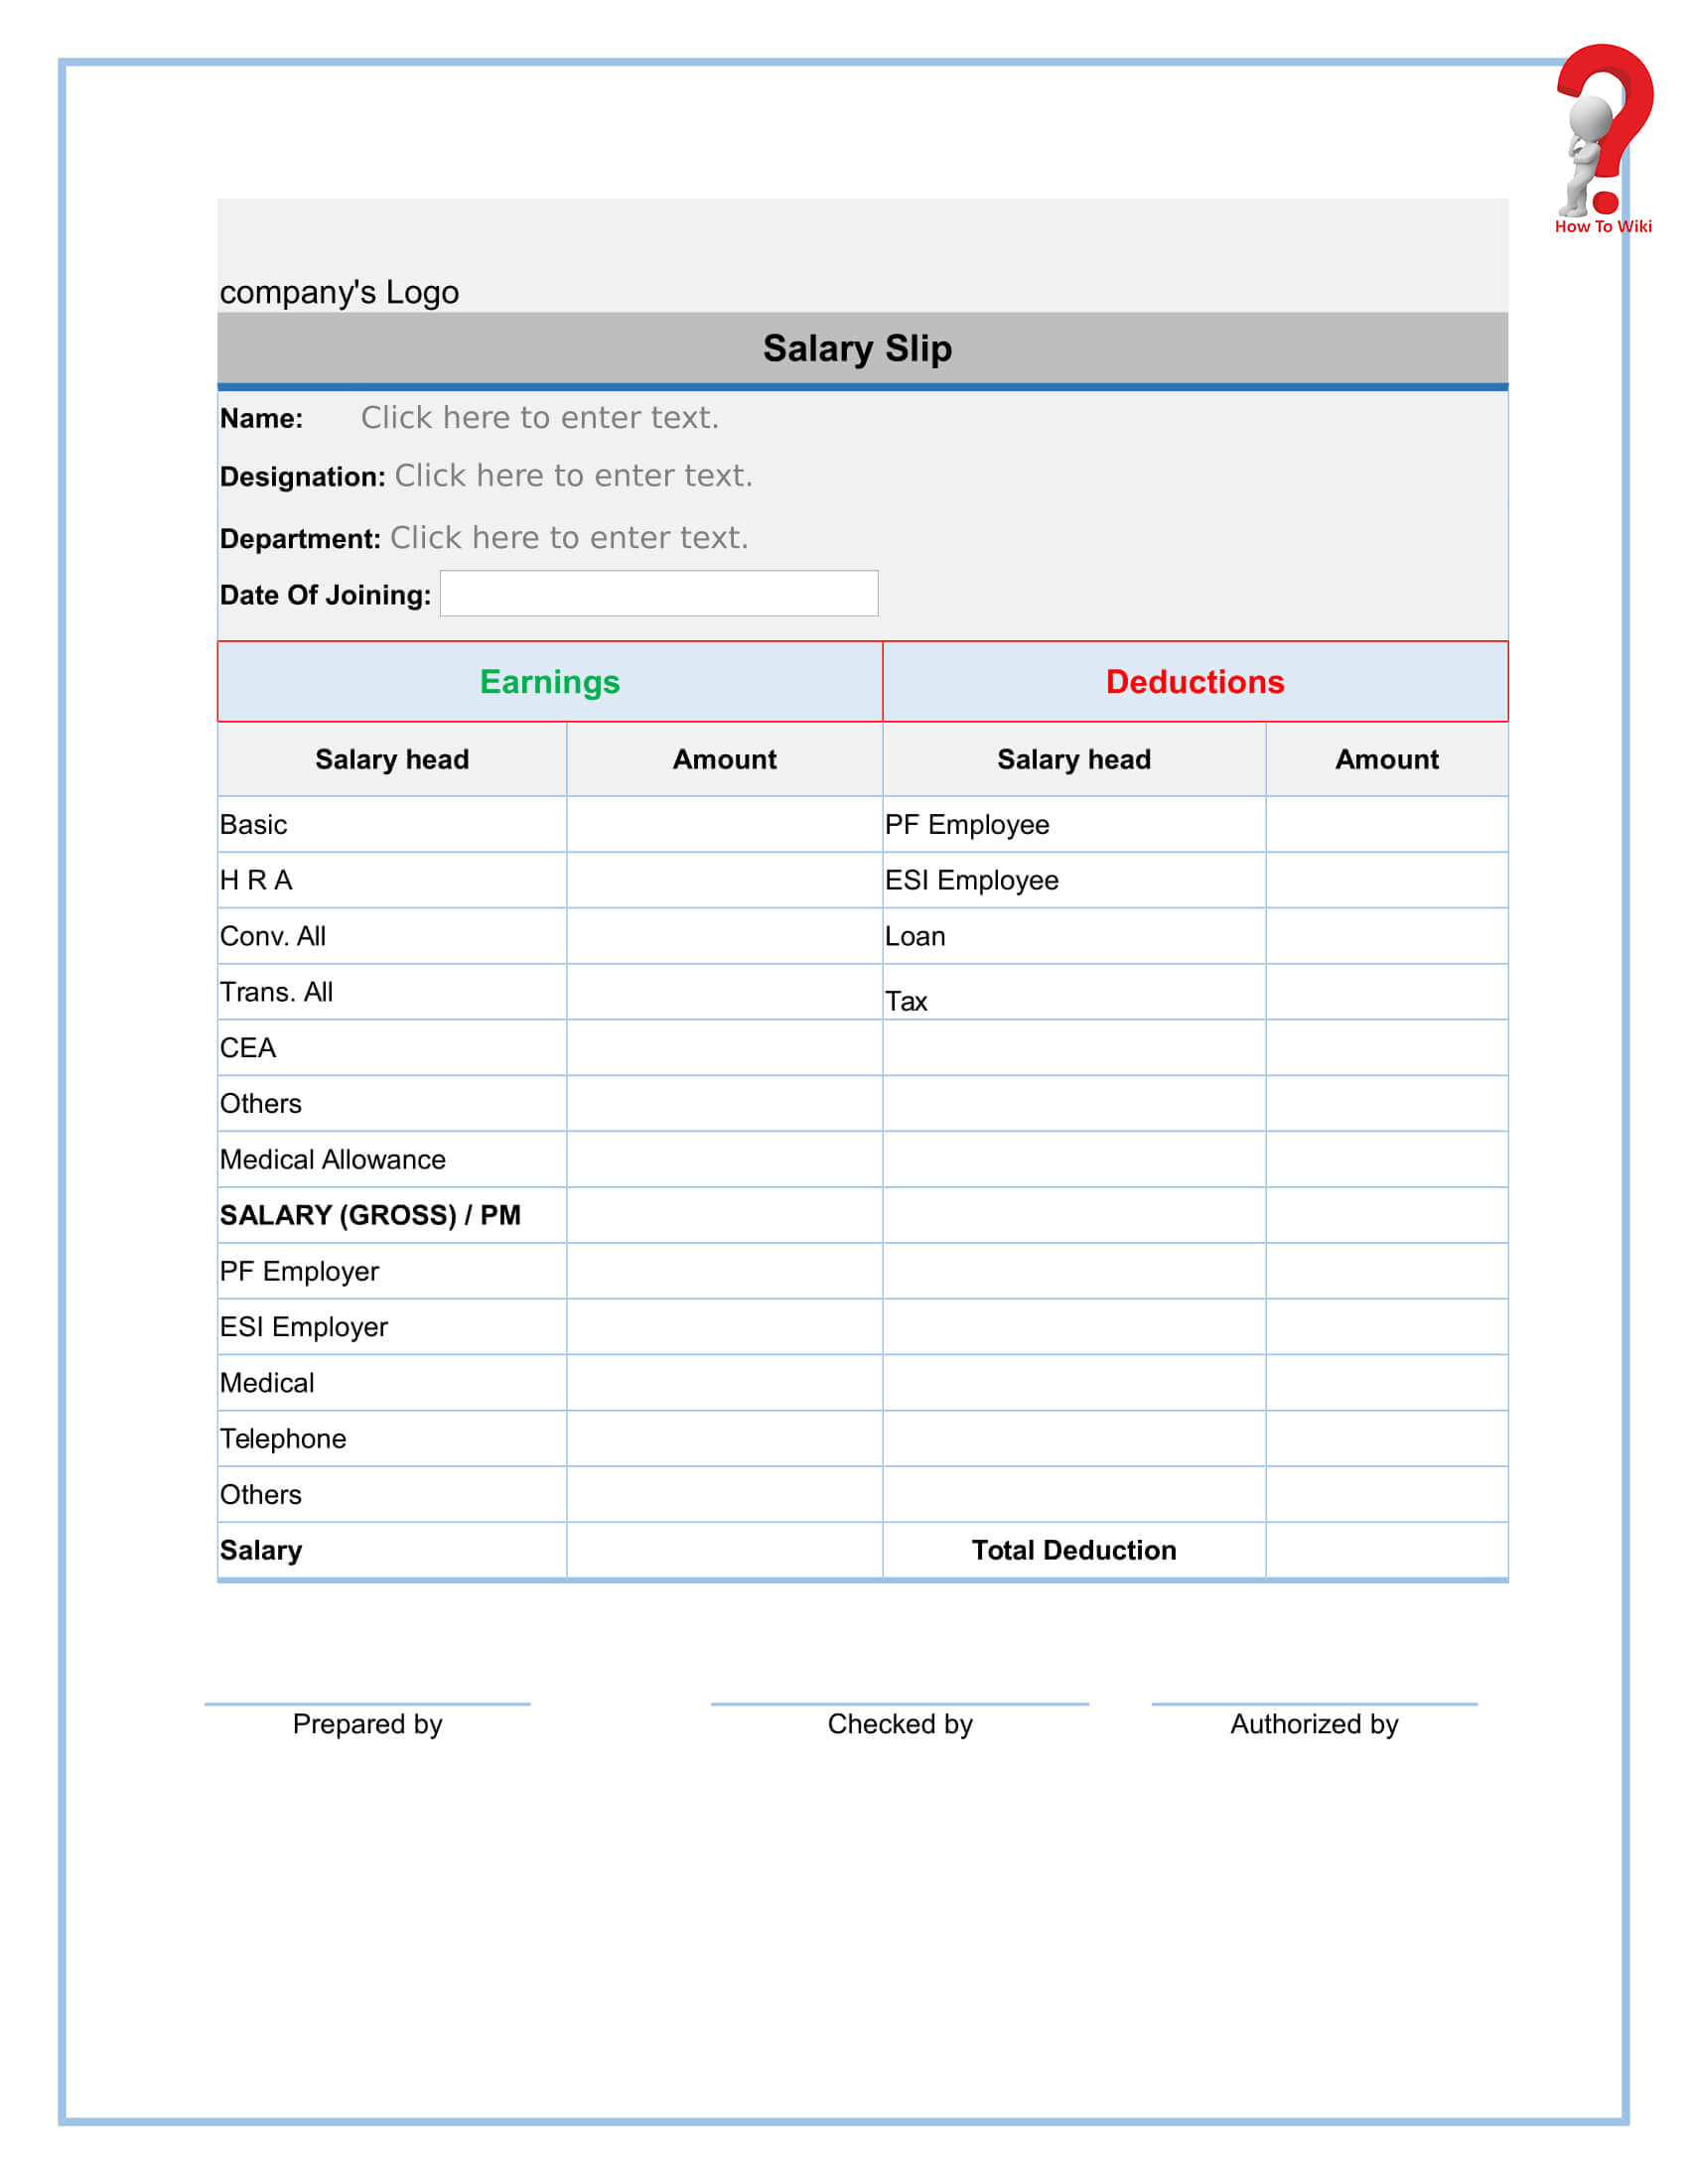 Free Blank Payslip Template 1 | How To Wiki With Blank Payslip Template